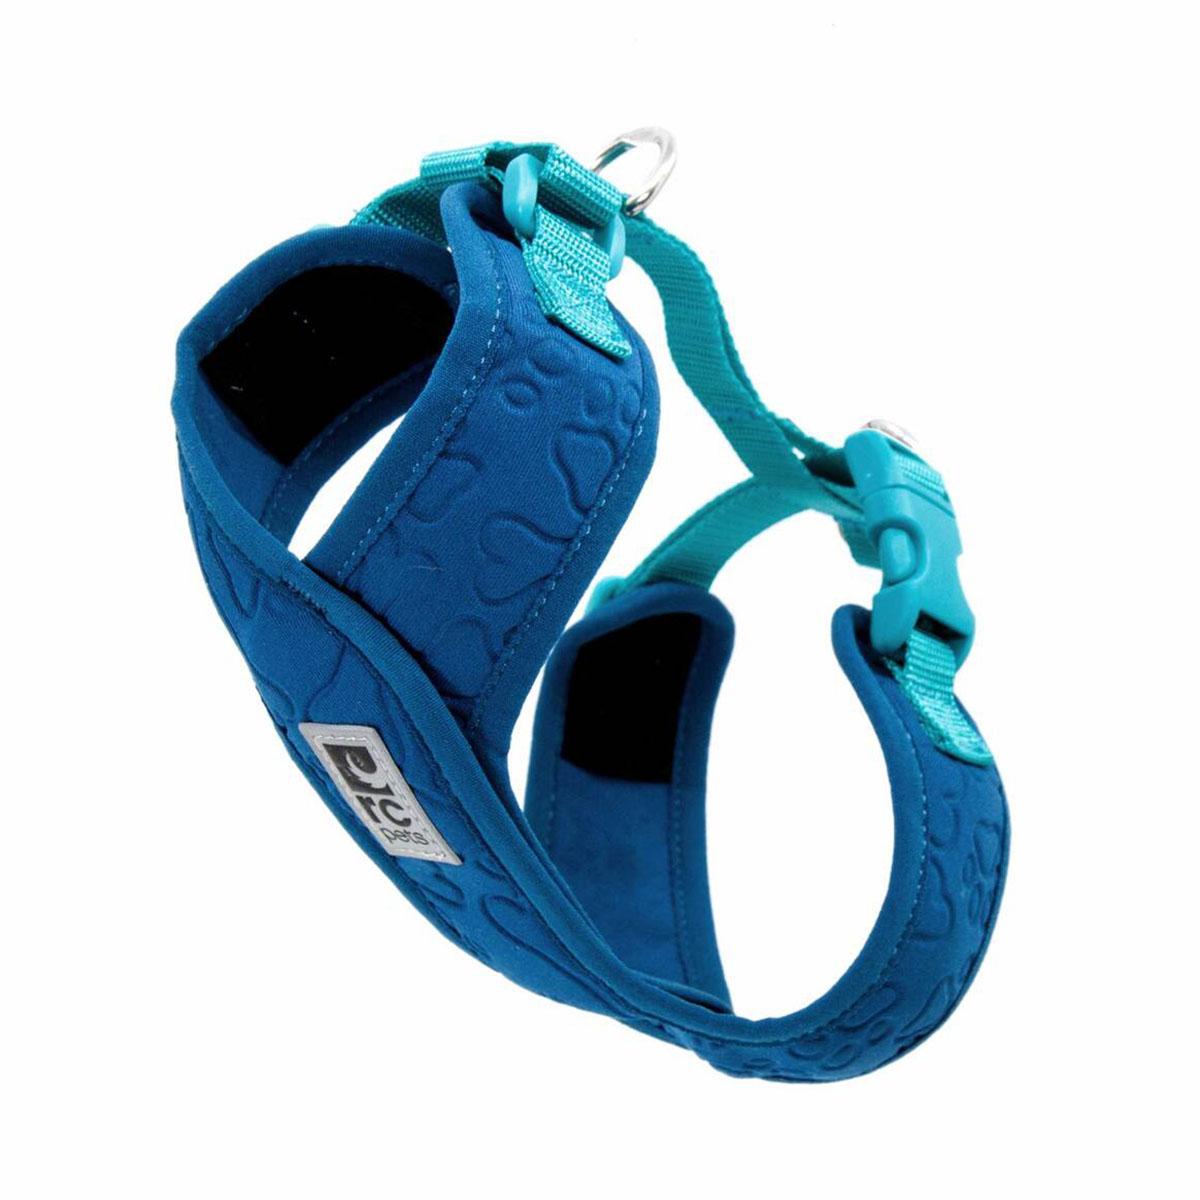 Swift Comfort Dog Harness by RC Pets - Dark Teal / Teal